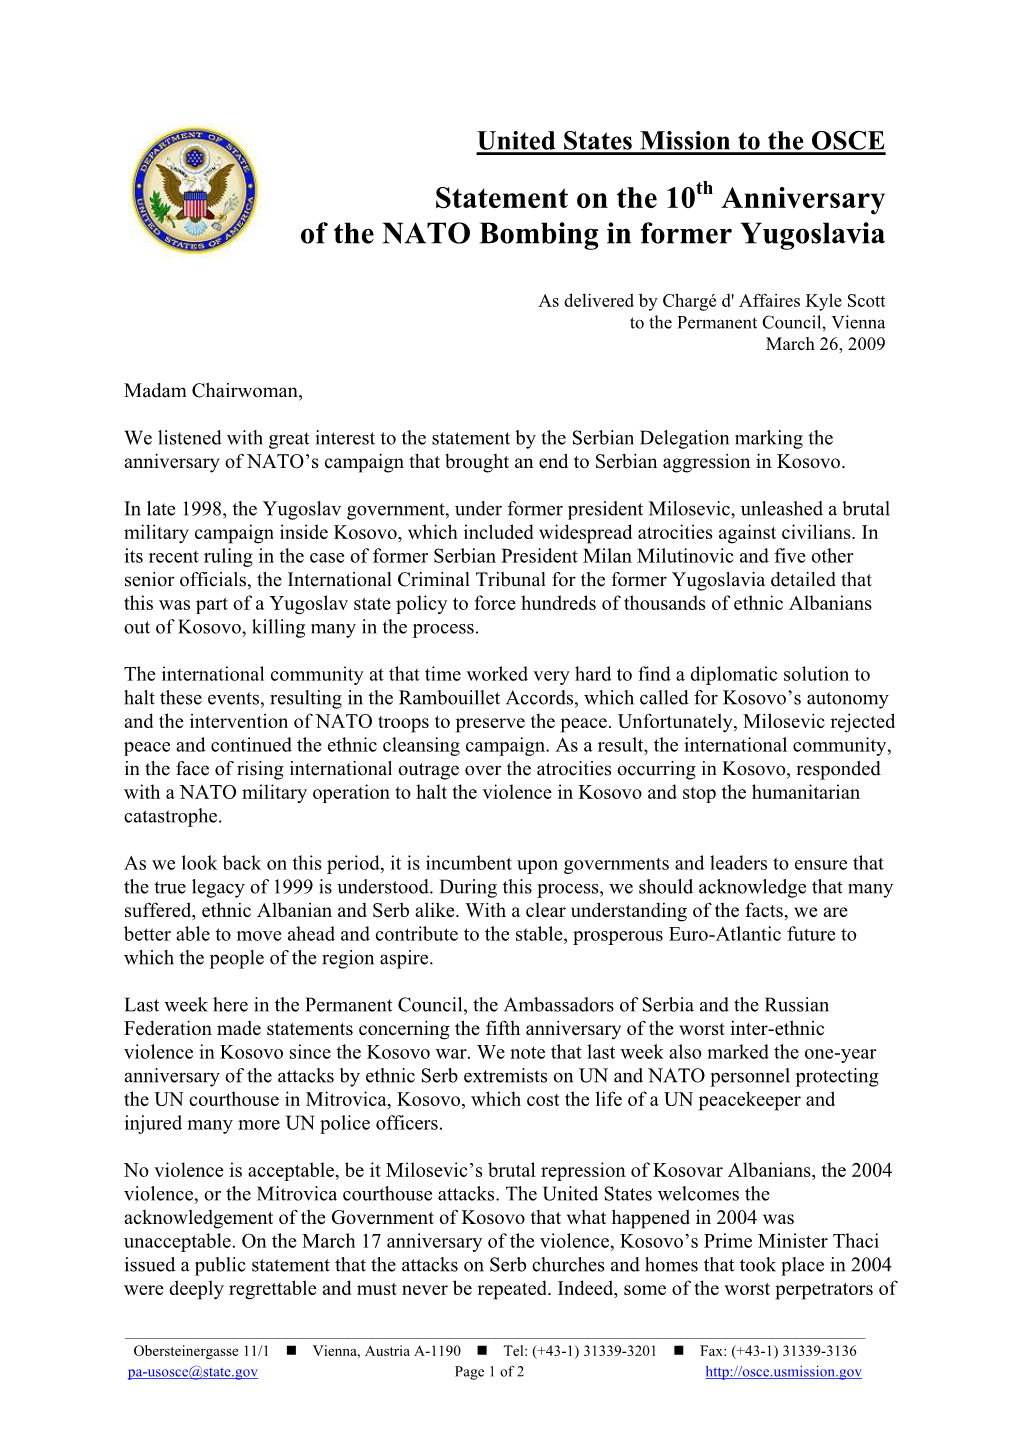 Statement on the 10 Anniversary of the NATO Bombing in Former Yugoslavia